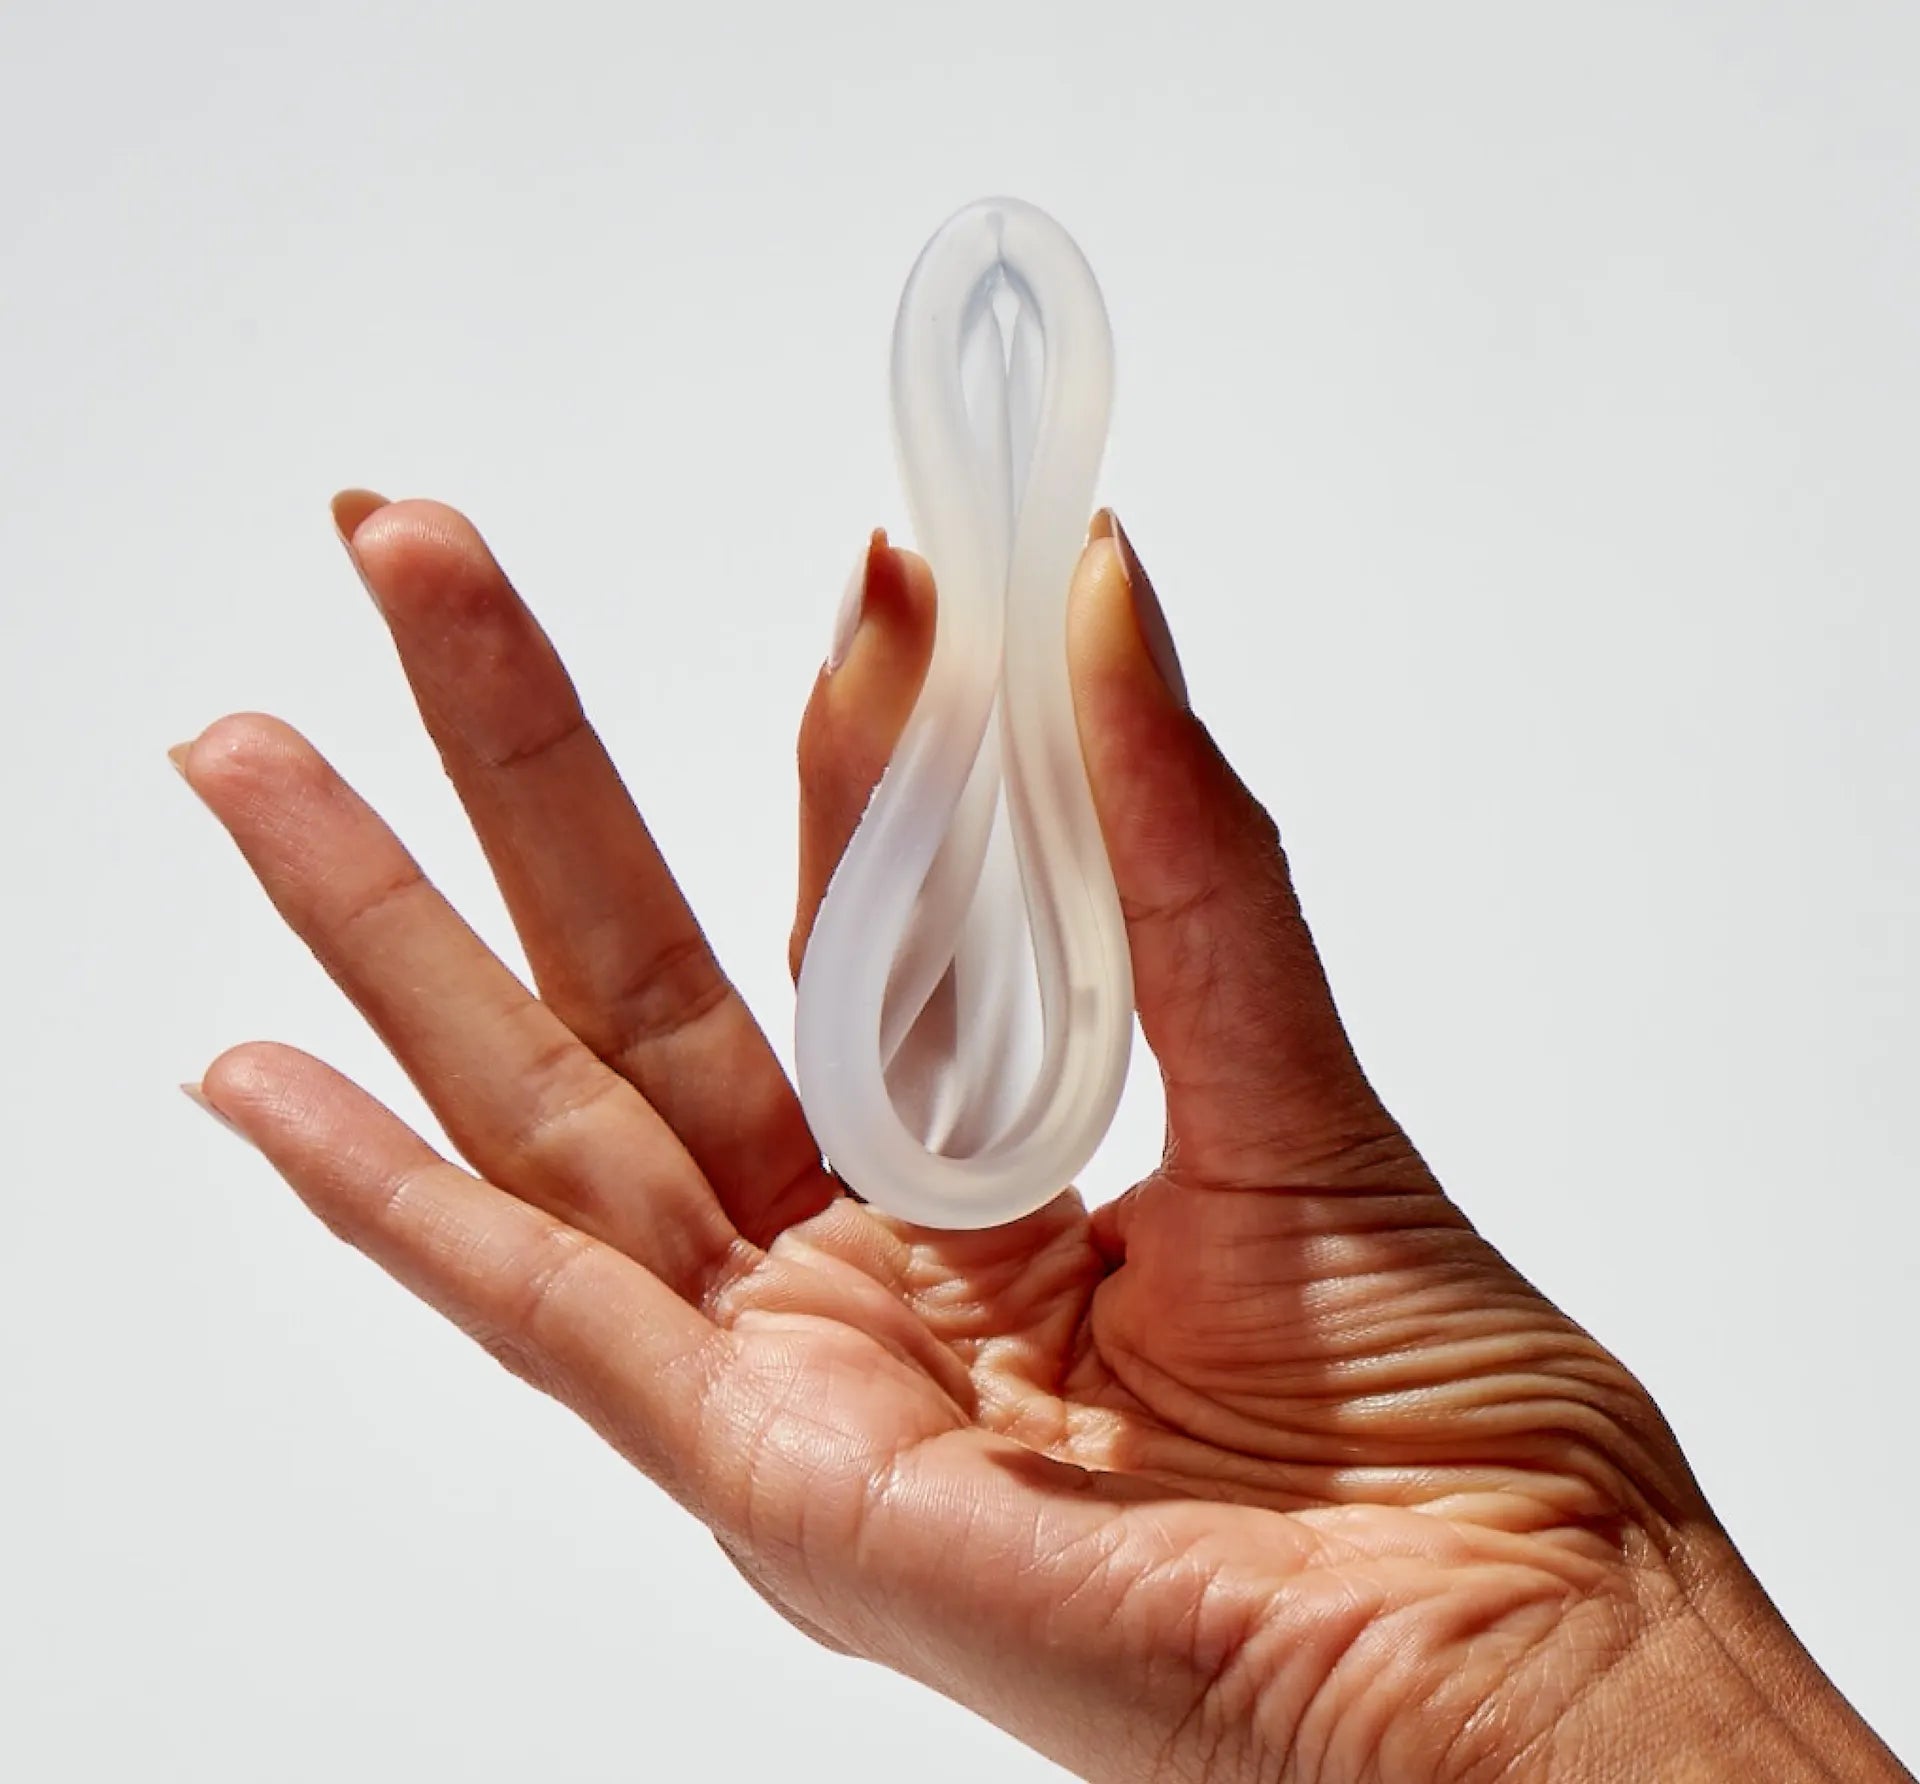 Person pinching a flex reusable menstrual disc by the middle to show size and insertion technique